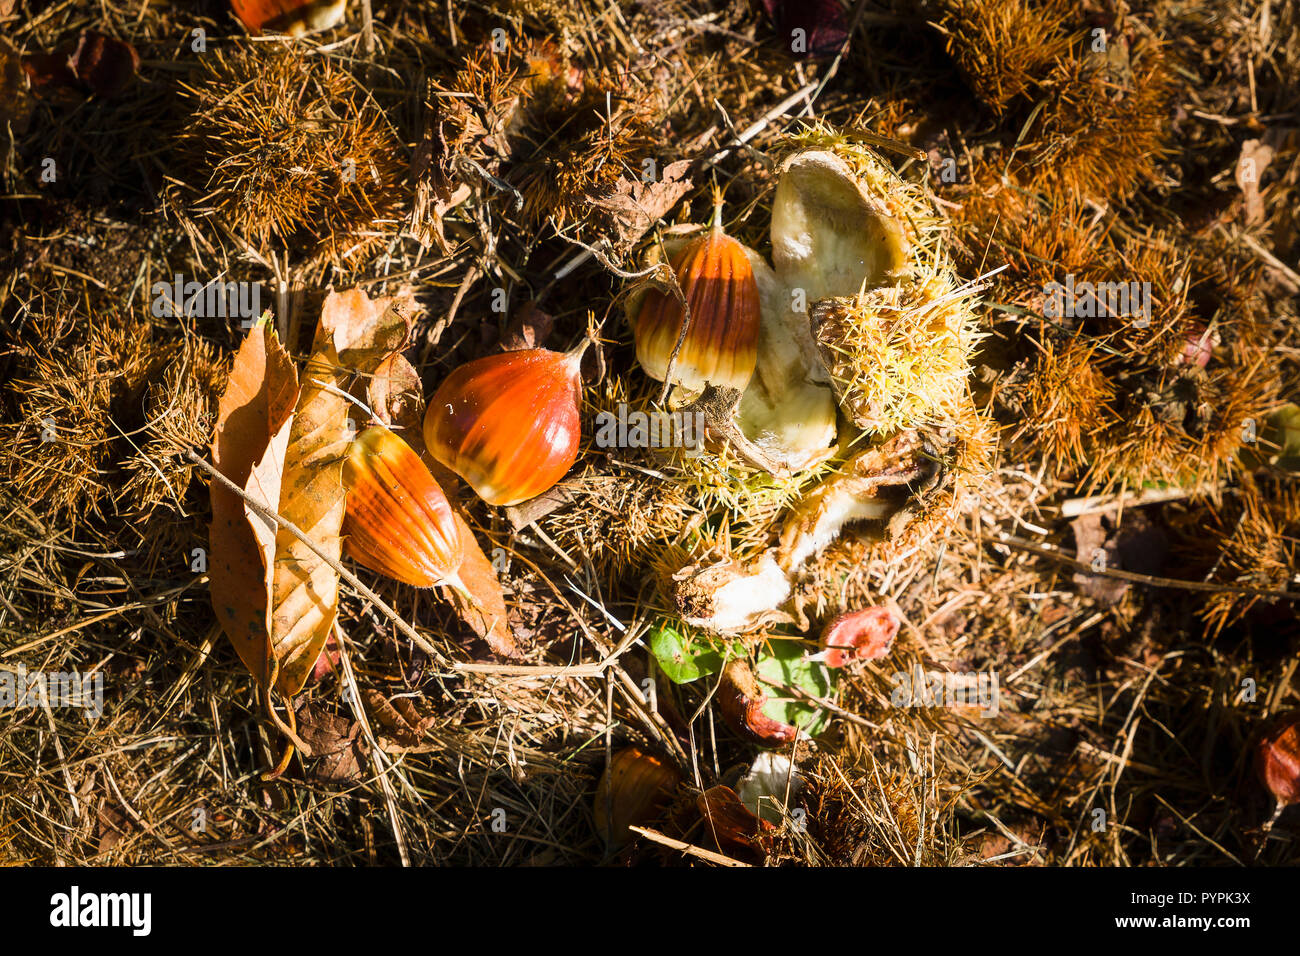 Ripe chestnuts have fallen to the ground  ready to be discovered and roasted in Wiltshire England uk Stock Photo